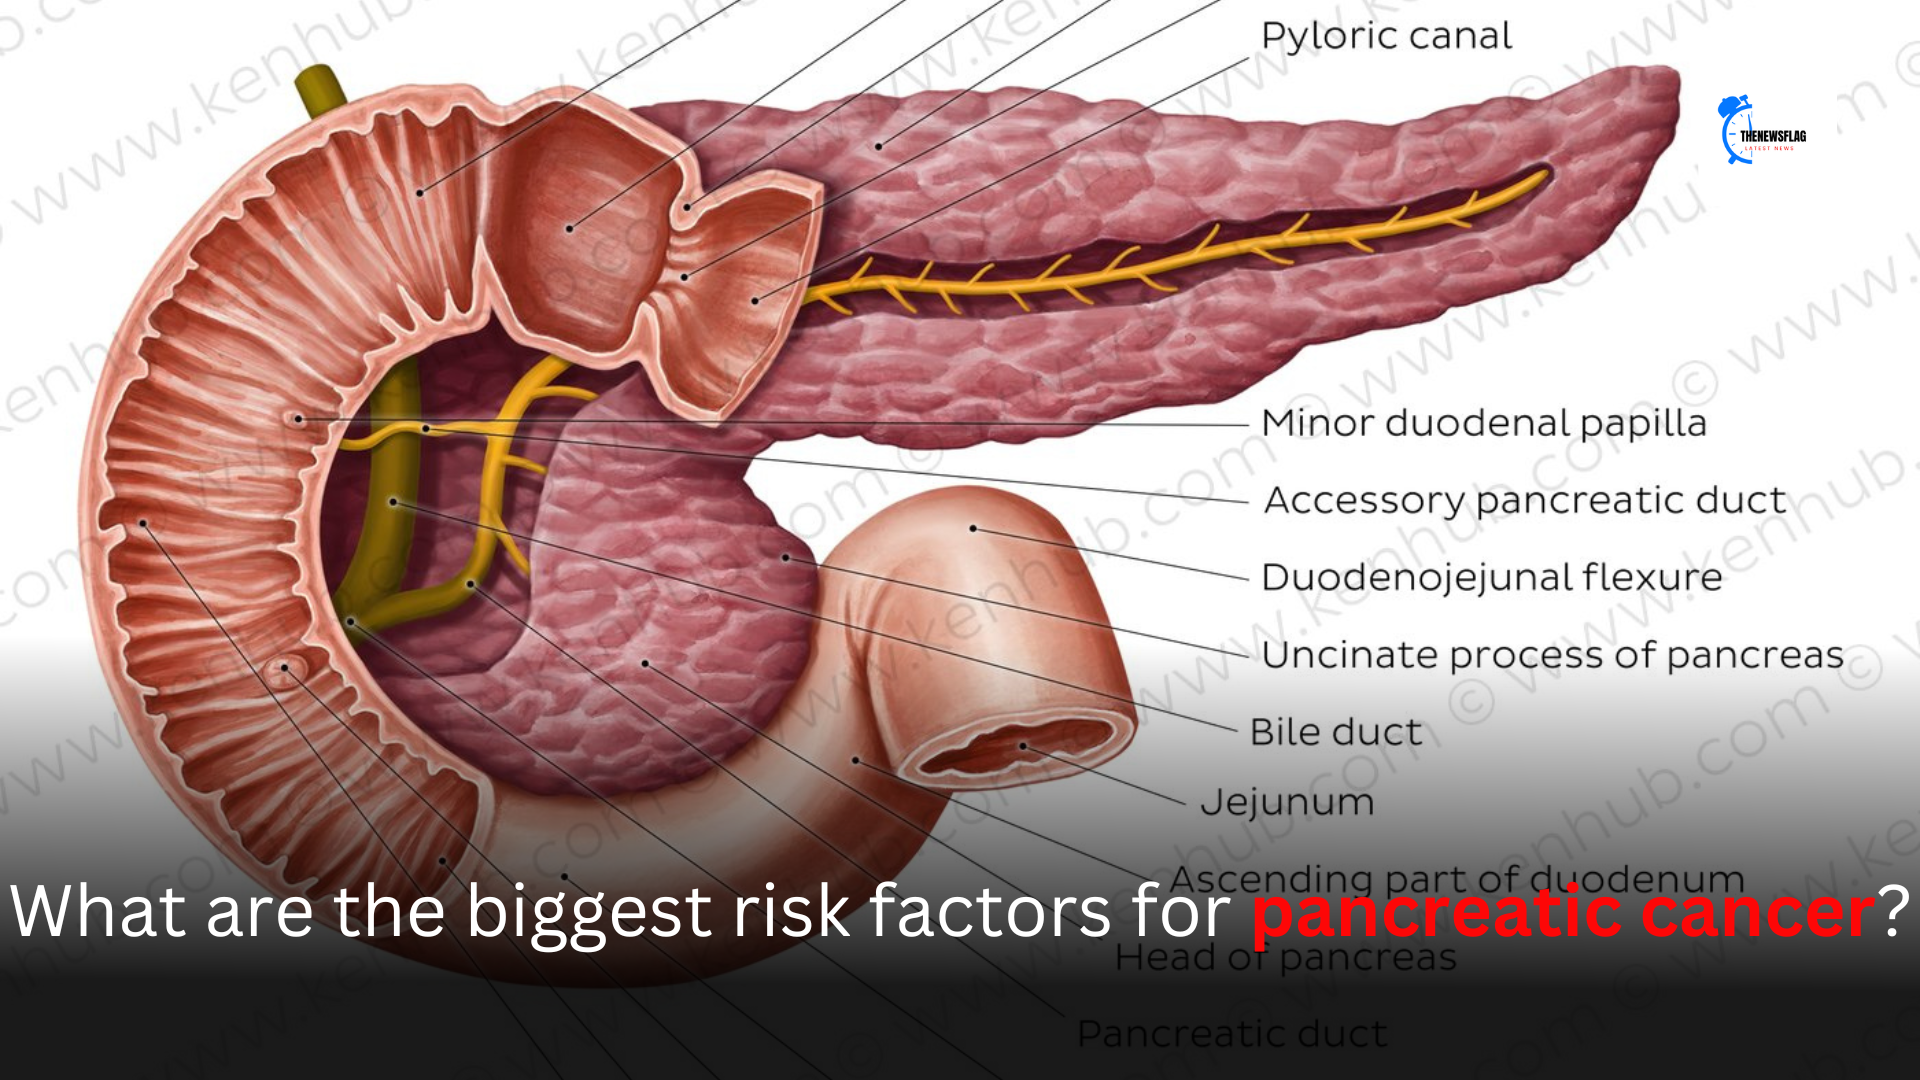 What are the biggest risk factors for pancreatic cancer?